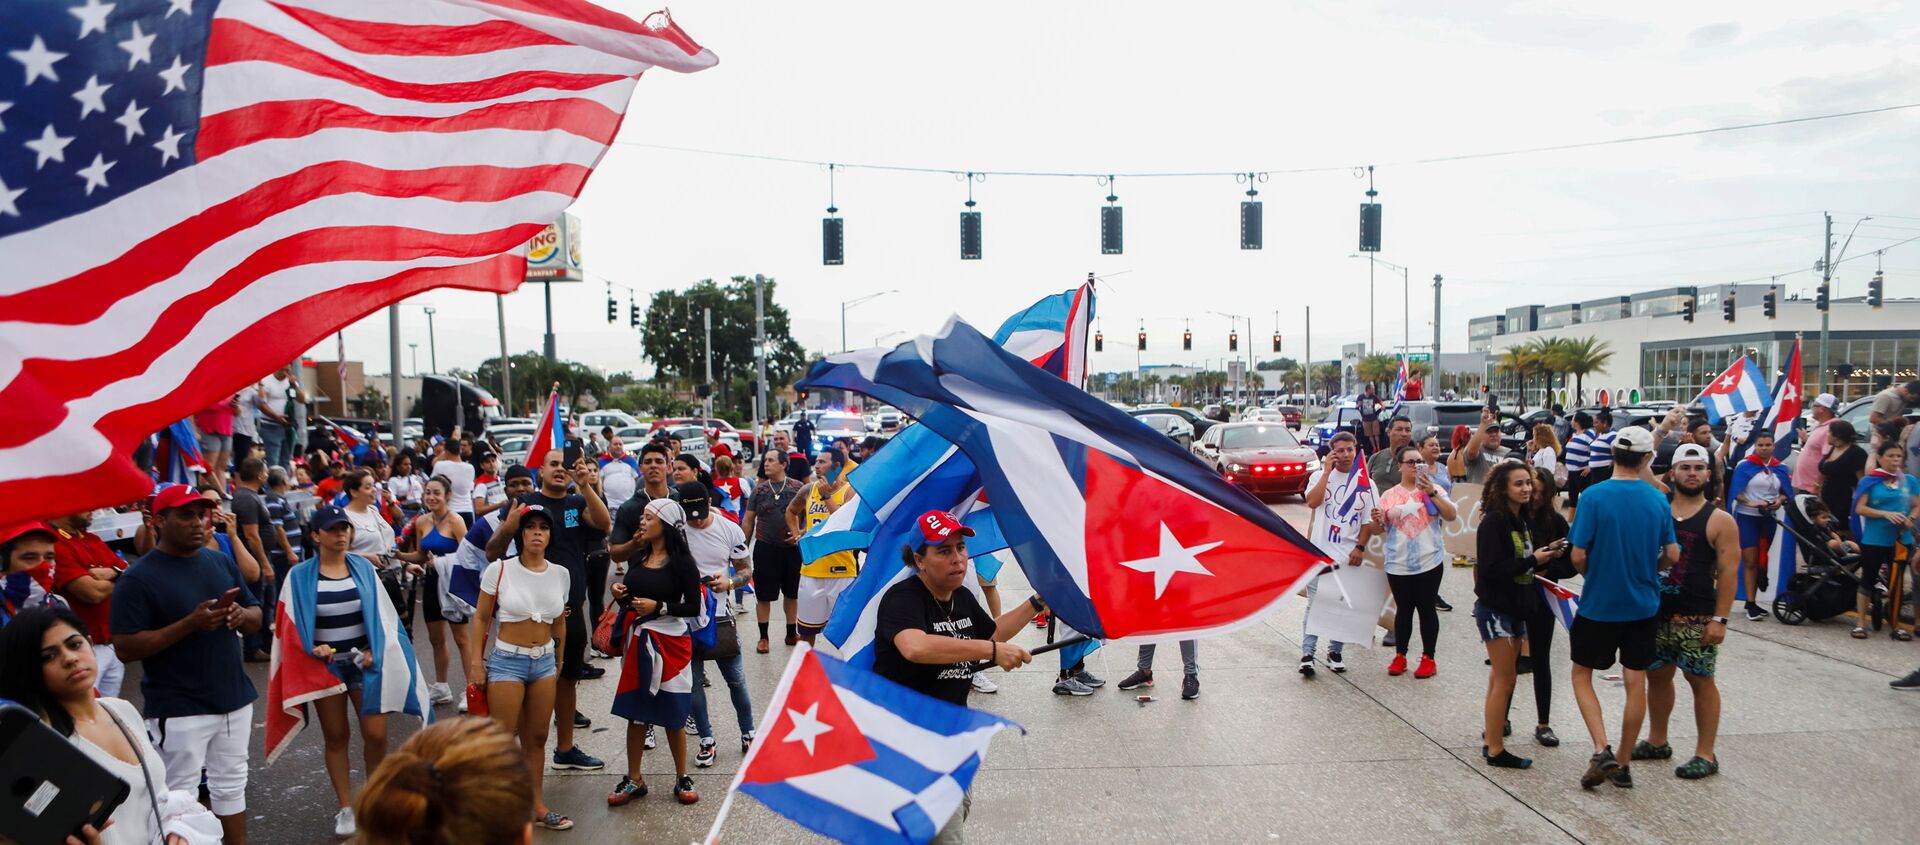 People block Dale Mabry Highway during a protest against the Cuban government, in Tampa, Florida, U.S. July 13, 2021. REUTERS/Octavio Jones - Sputnik International, 1920, 15.07.2021